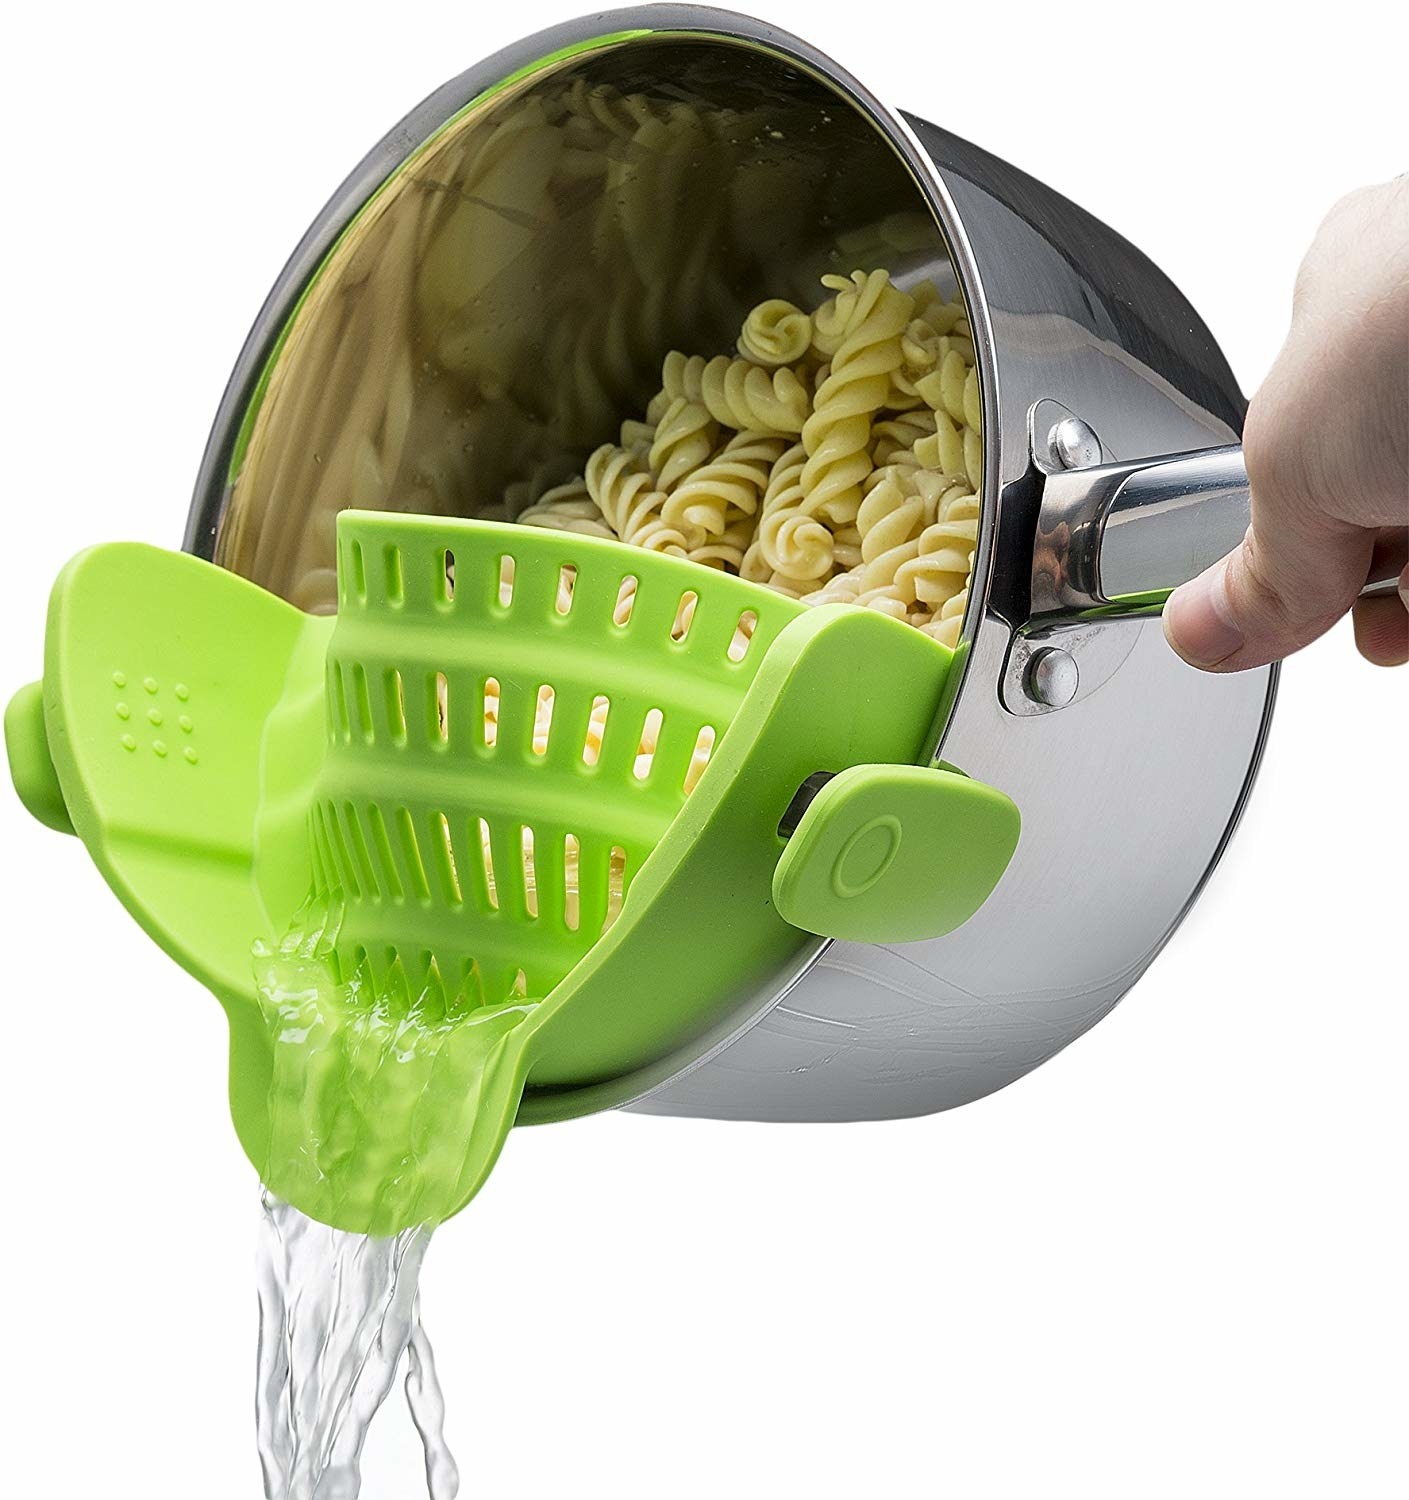 32 Cheap Kitchen Products To Improve The Way You Cook